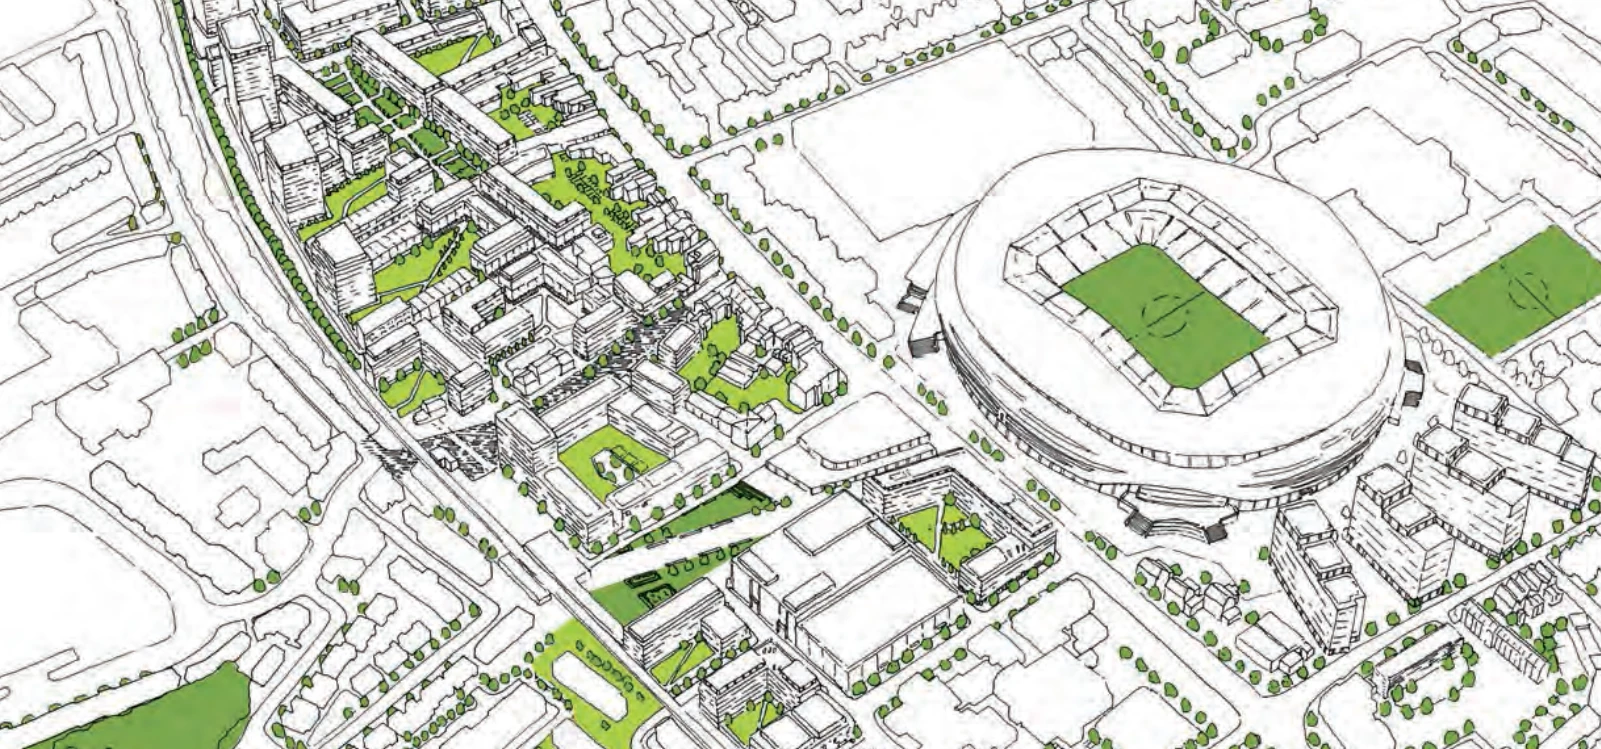 The vision for the new High Road West plans near the new Spurs stadium.